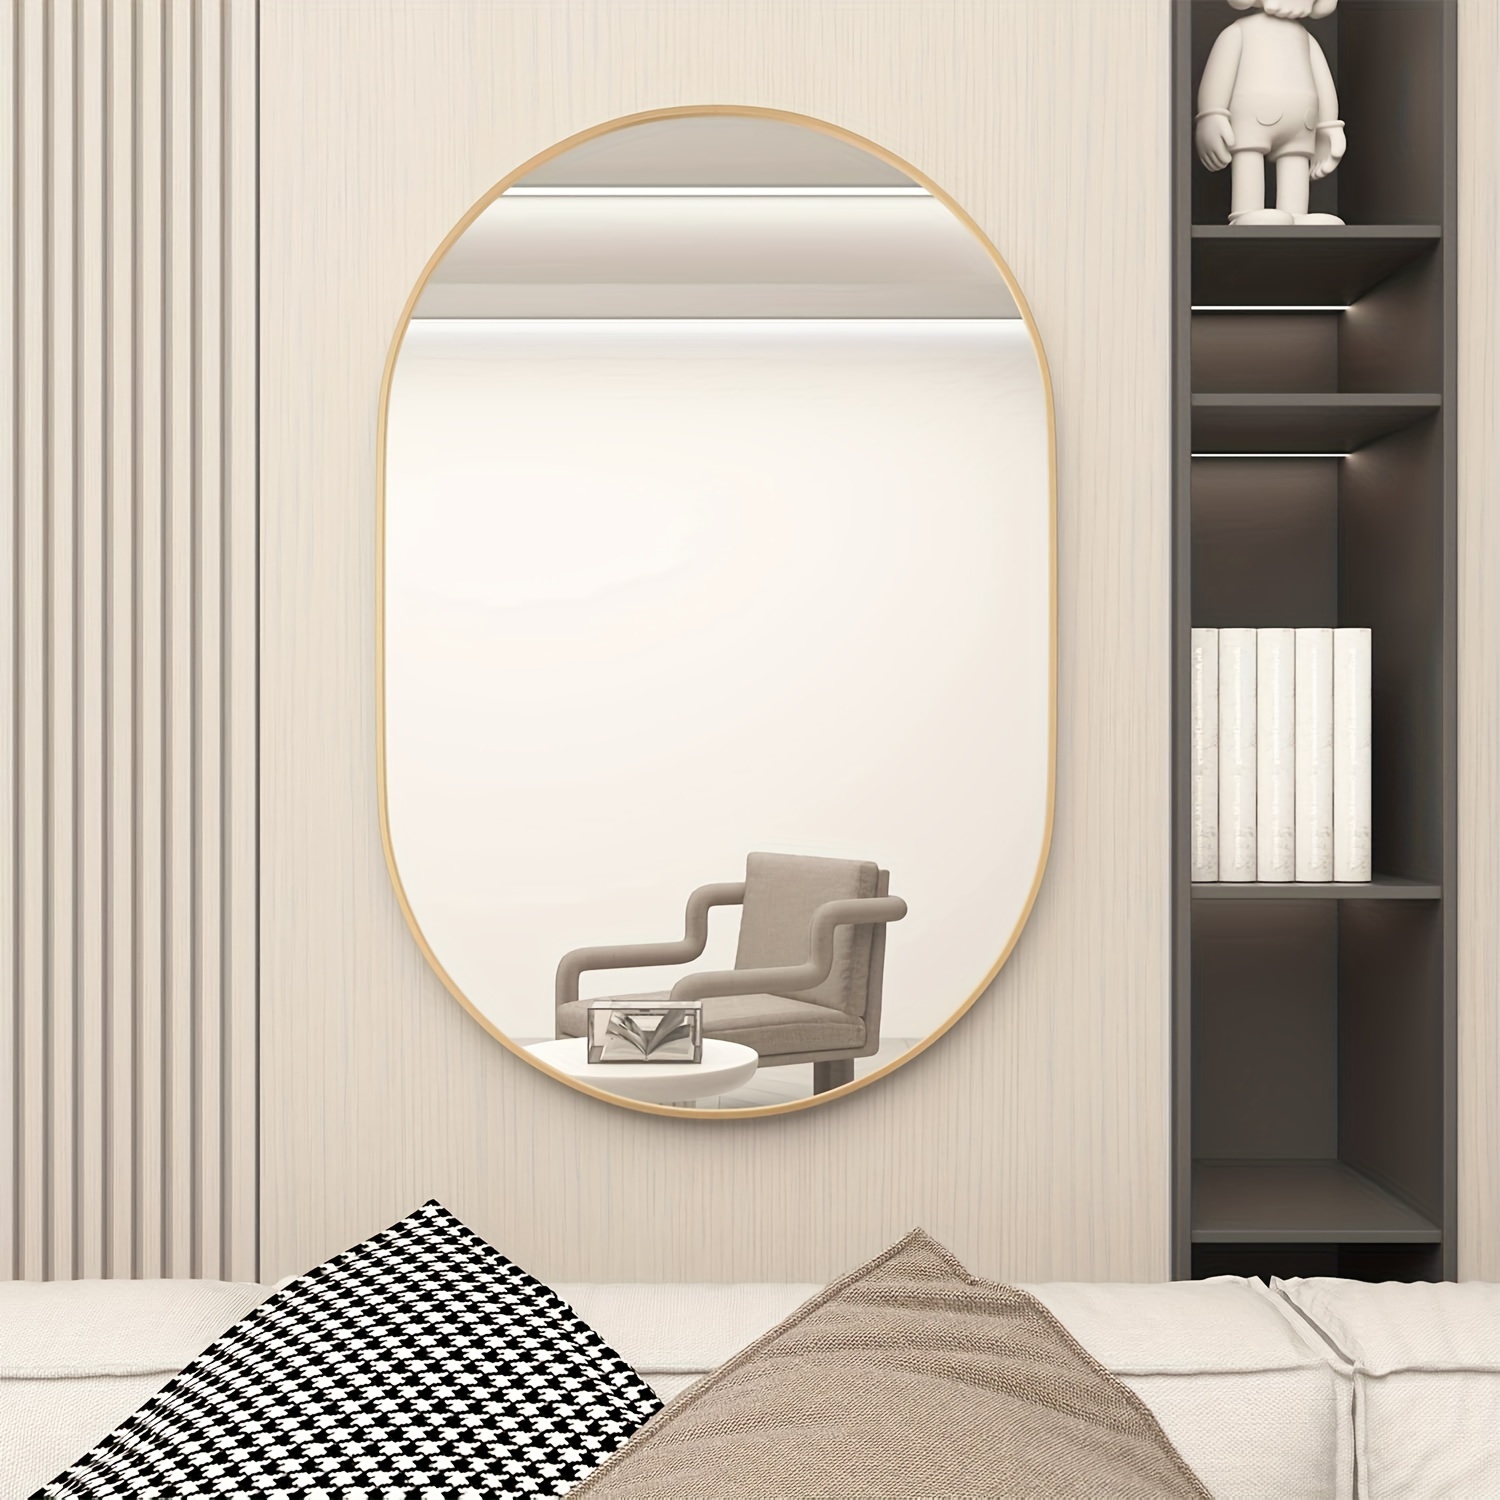 

Cassilando Oval Bathroom Mirror Wall Vanity Oval Mirrors, 20"x30" Black For Over Sink Pill Mirrors Capsule Wall Mounted Mirror, Modern Mirror With Metal Frame For Wall Decor